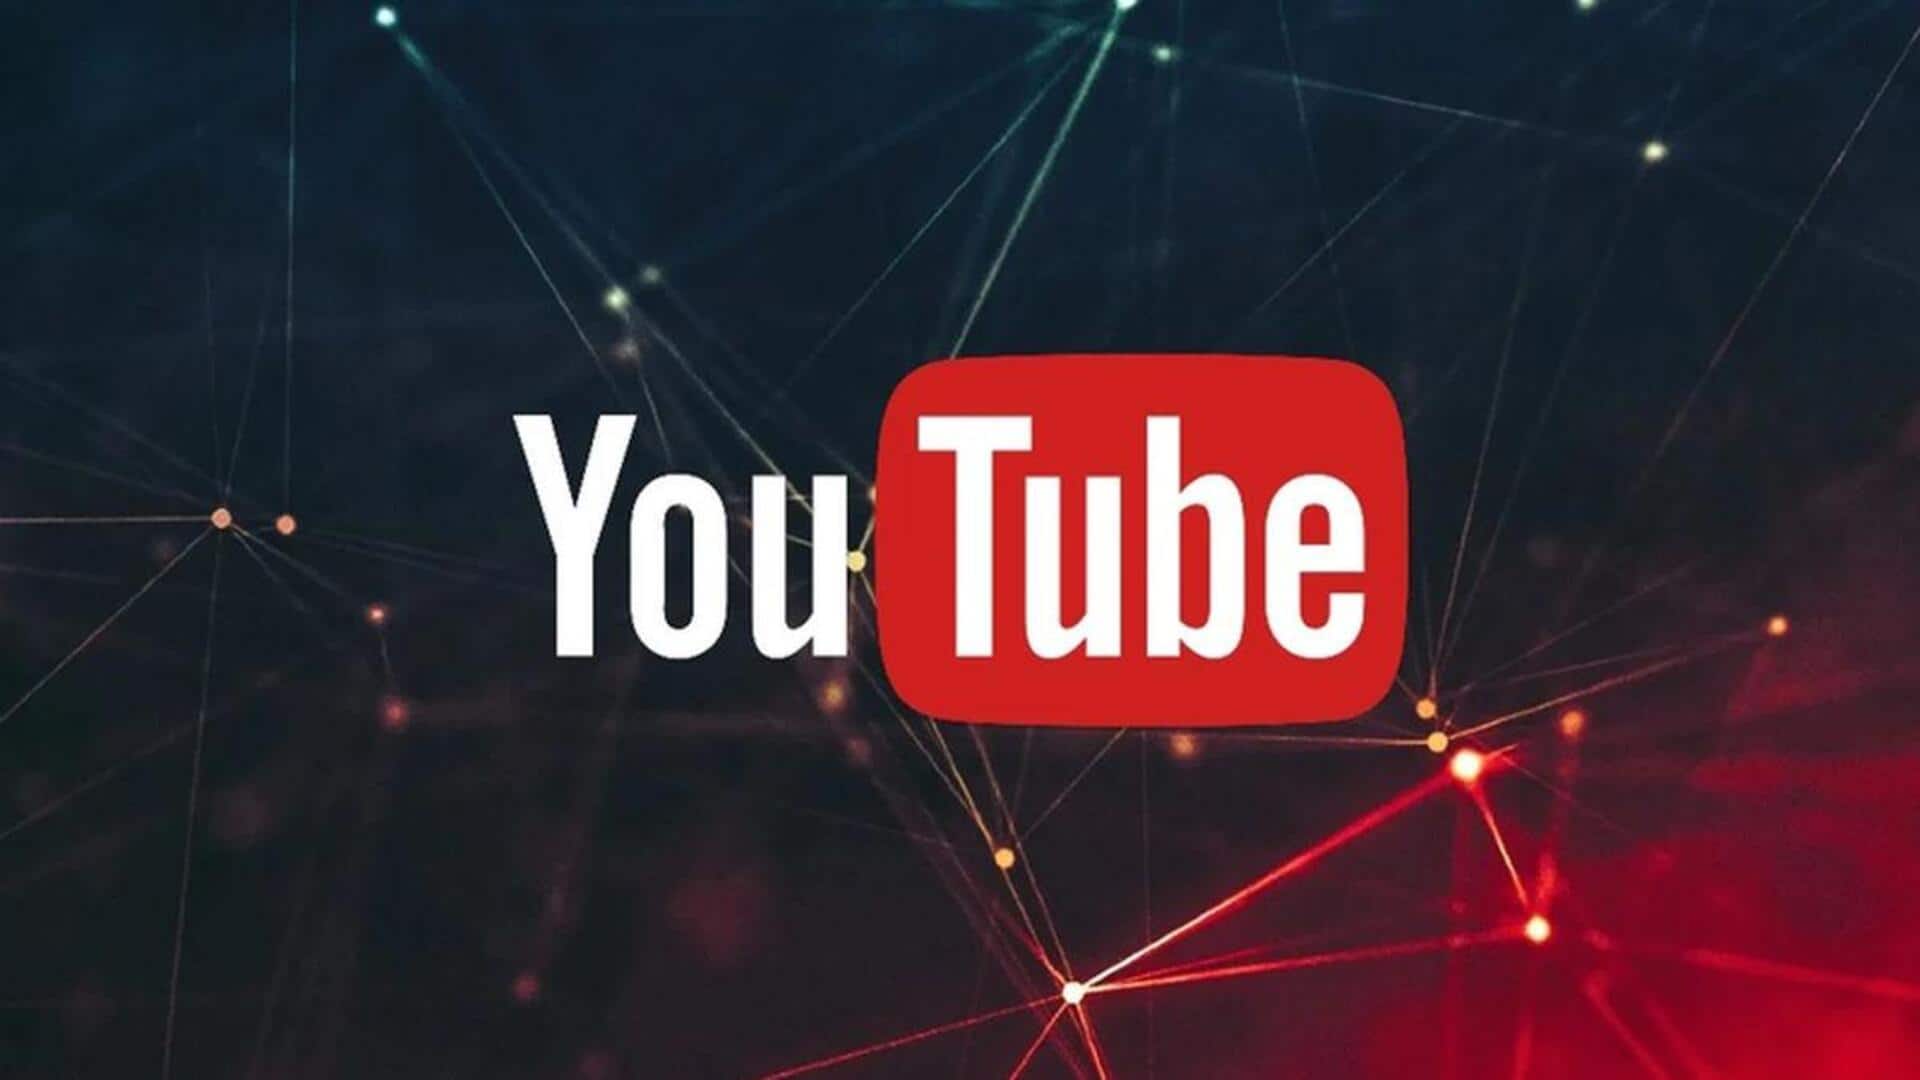 US federal authorities asking Google to share YouTube user data